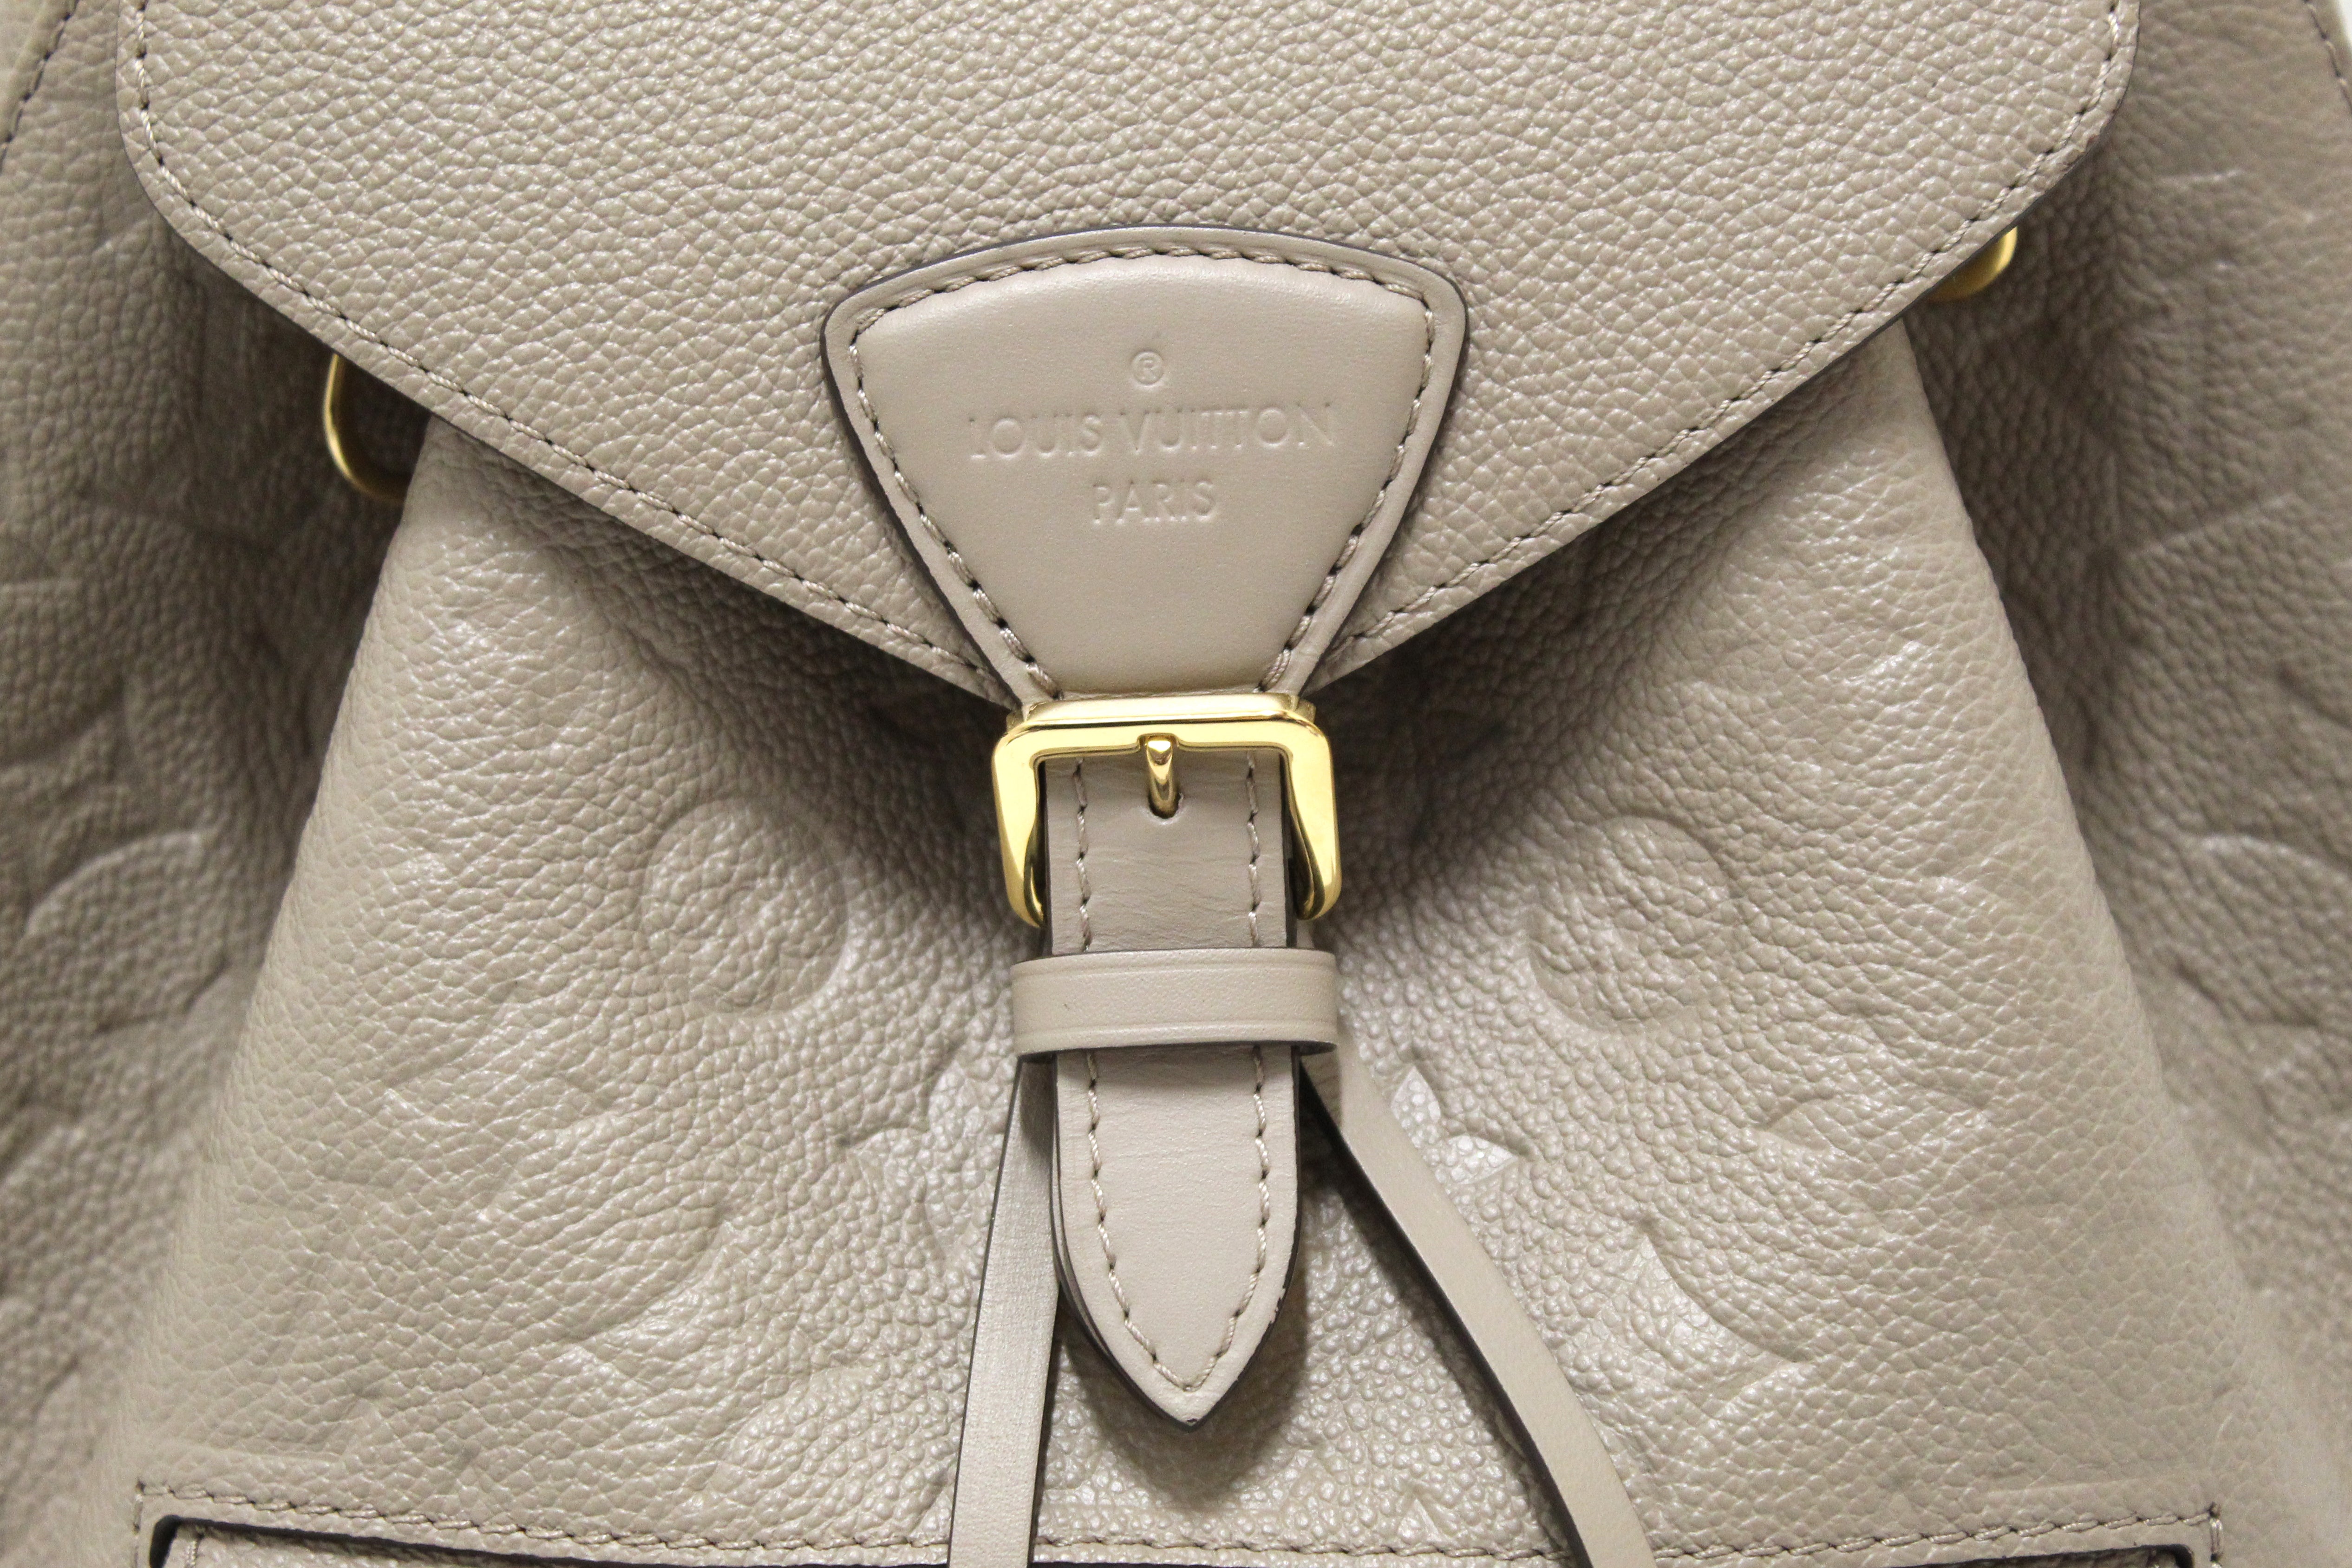 Black, creme, or turtledove, the revamped Louis Vuitton Montsouris